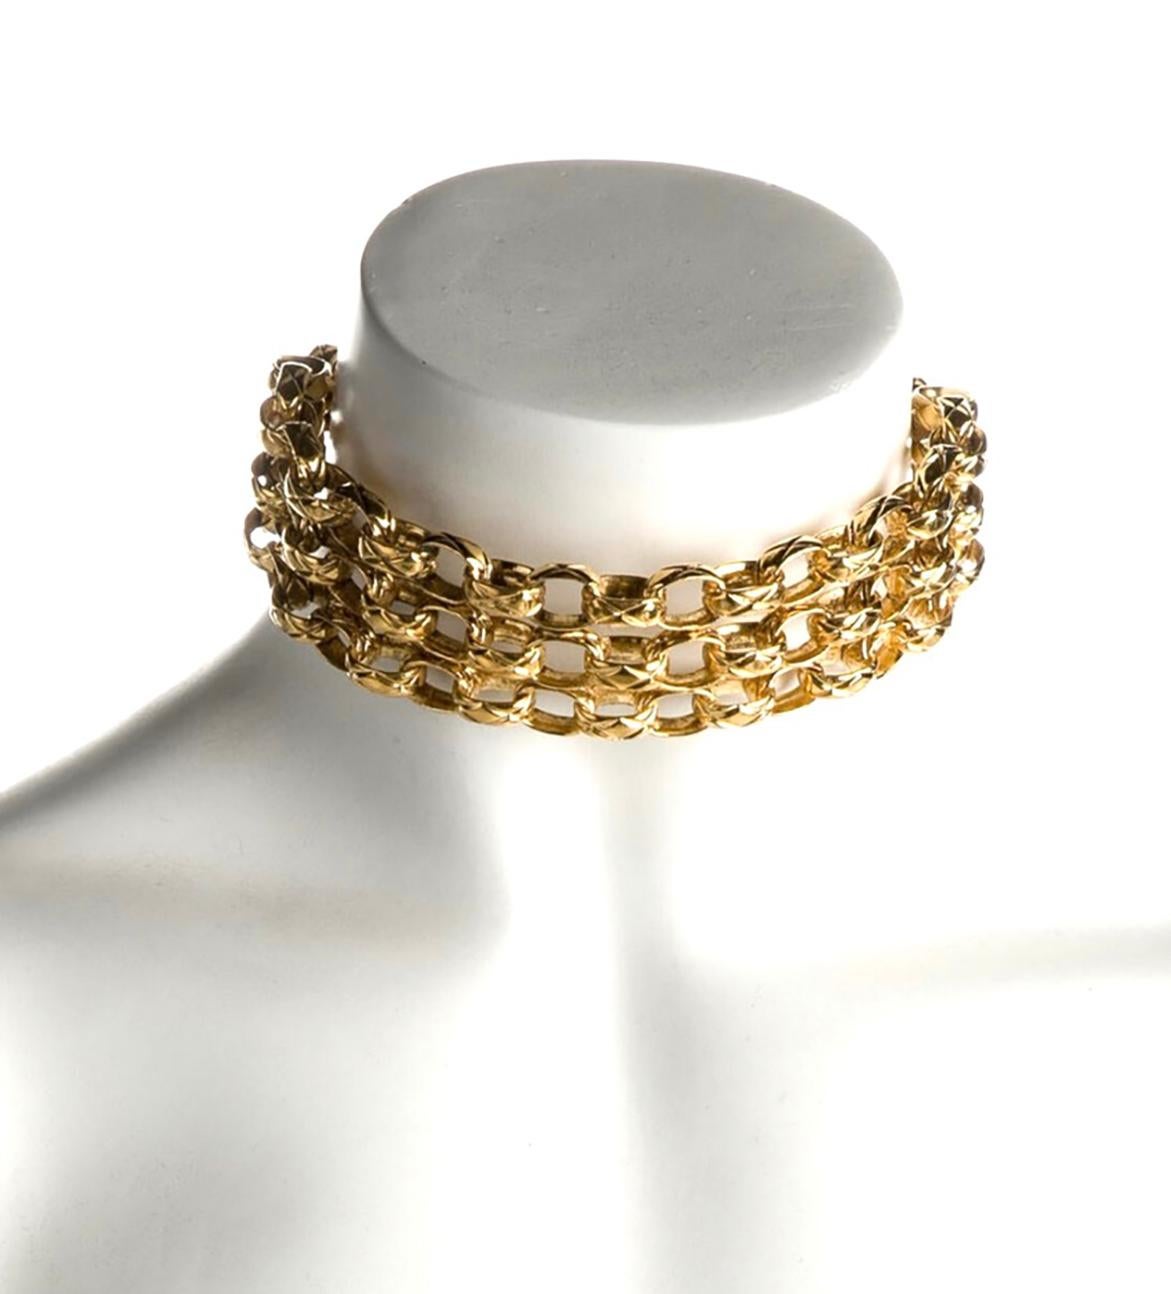 1984 Chanel collection 23
gold plated gripoix chain choker
Condition: very good